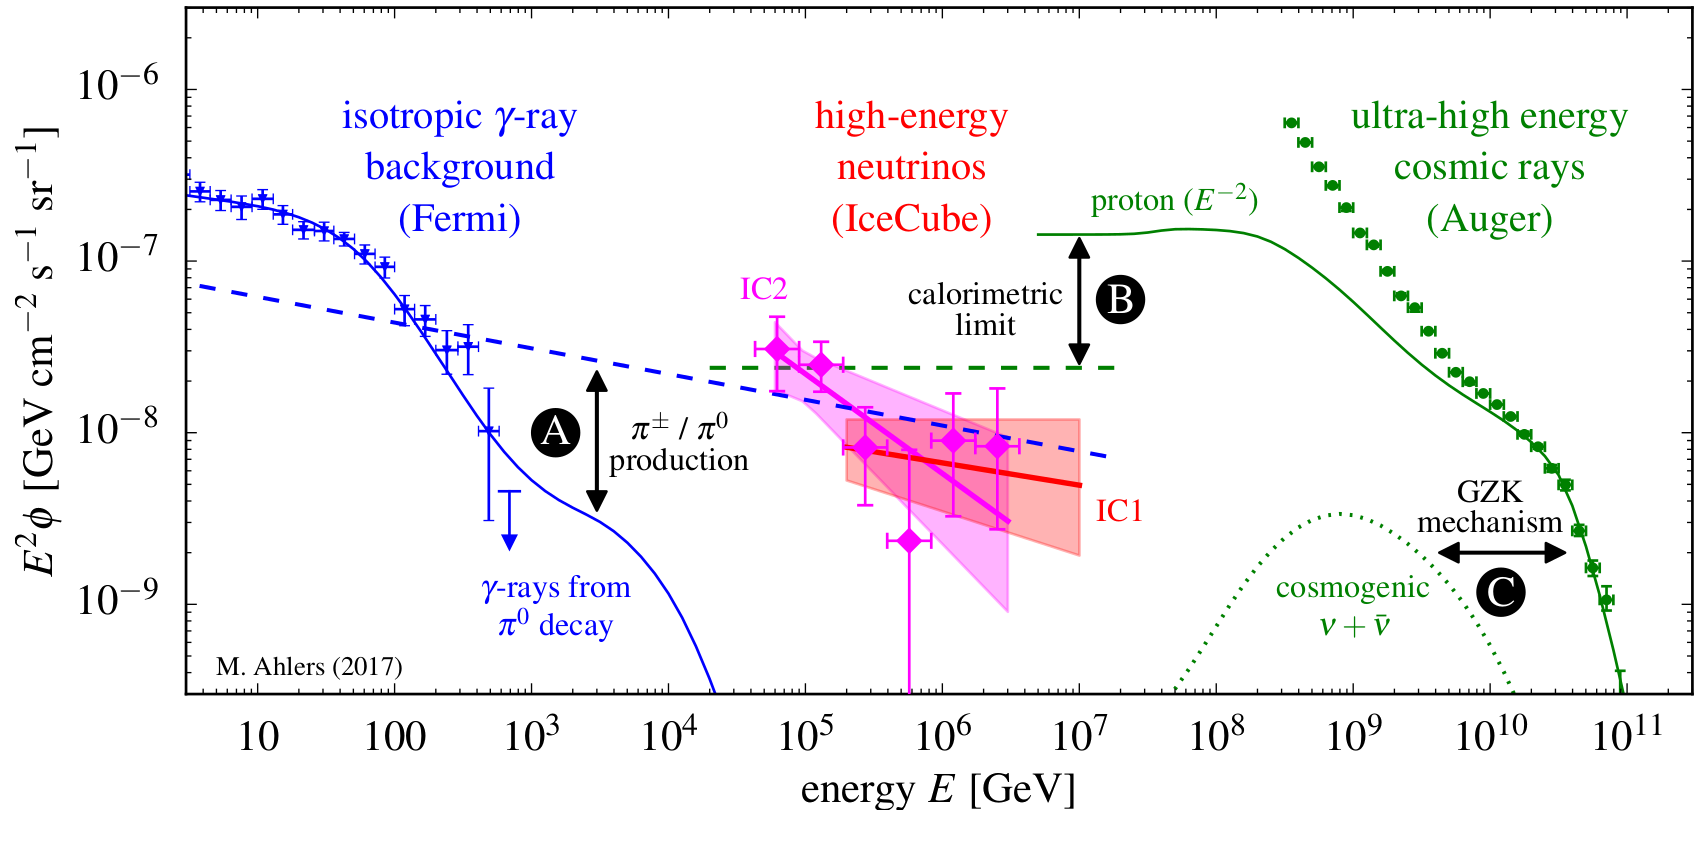 Comparison of the Diffuse Flux / energy scale from gamma rays, high energy neutrinos and ultra-high-energy cosmic rays